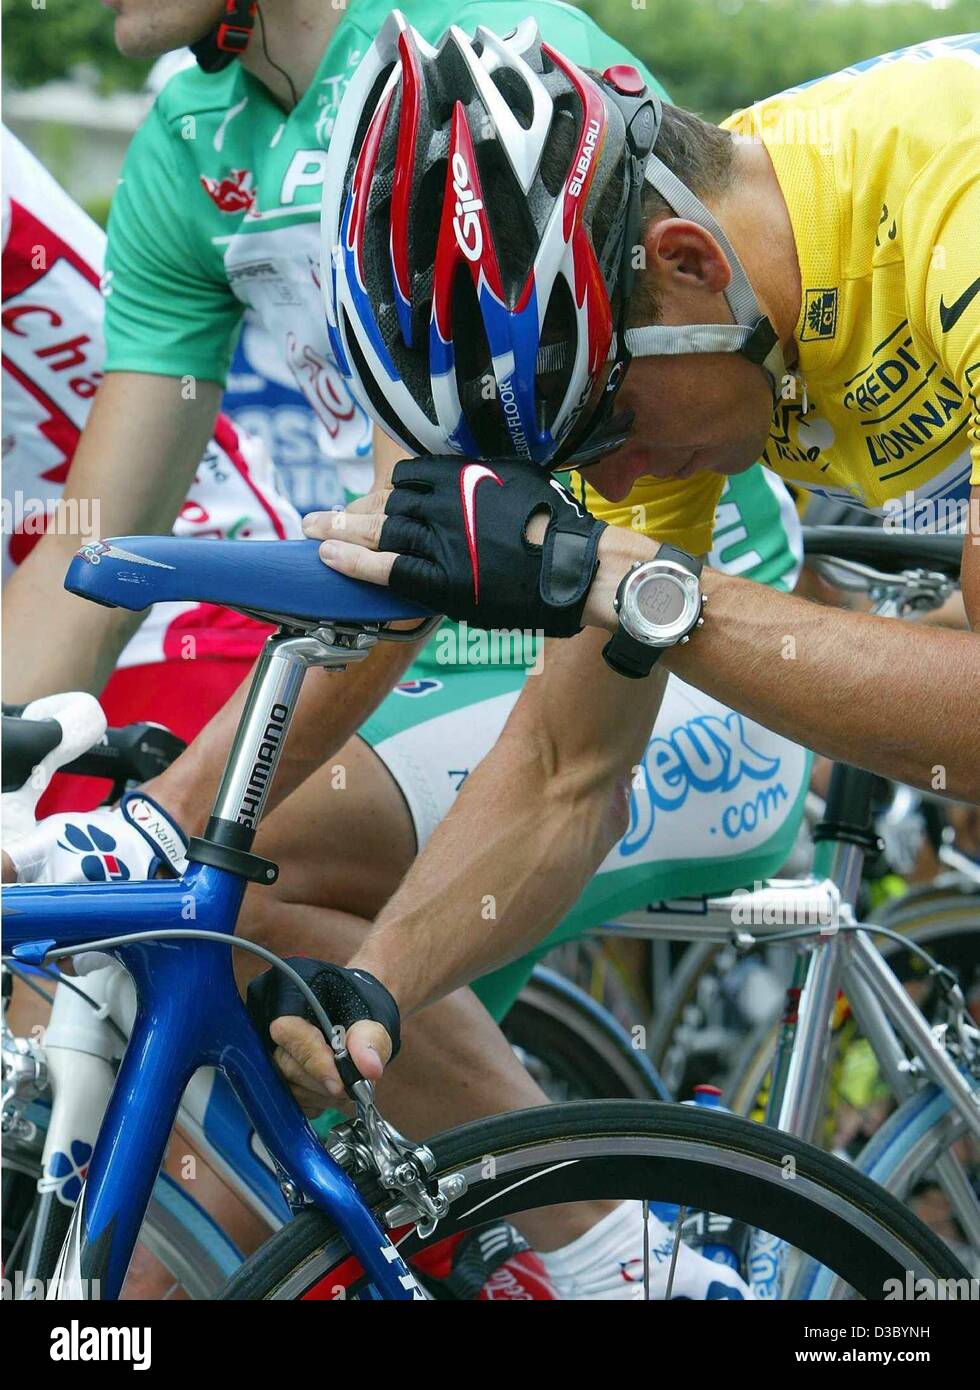 (dpa) - US Postal-Berry Floor's Lance Armstrong from the US, wearing the overall leader's yellow jersey, inspects the brakes of his bicycle as he awaits the start of the 17th stage of the 2003 Tour de France cycling race in Dax, France, 24 July 2003. The 181.5km long 17th stage of the world's bigges Stock Photo